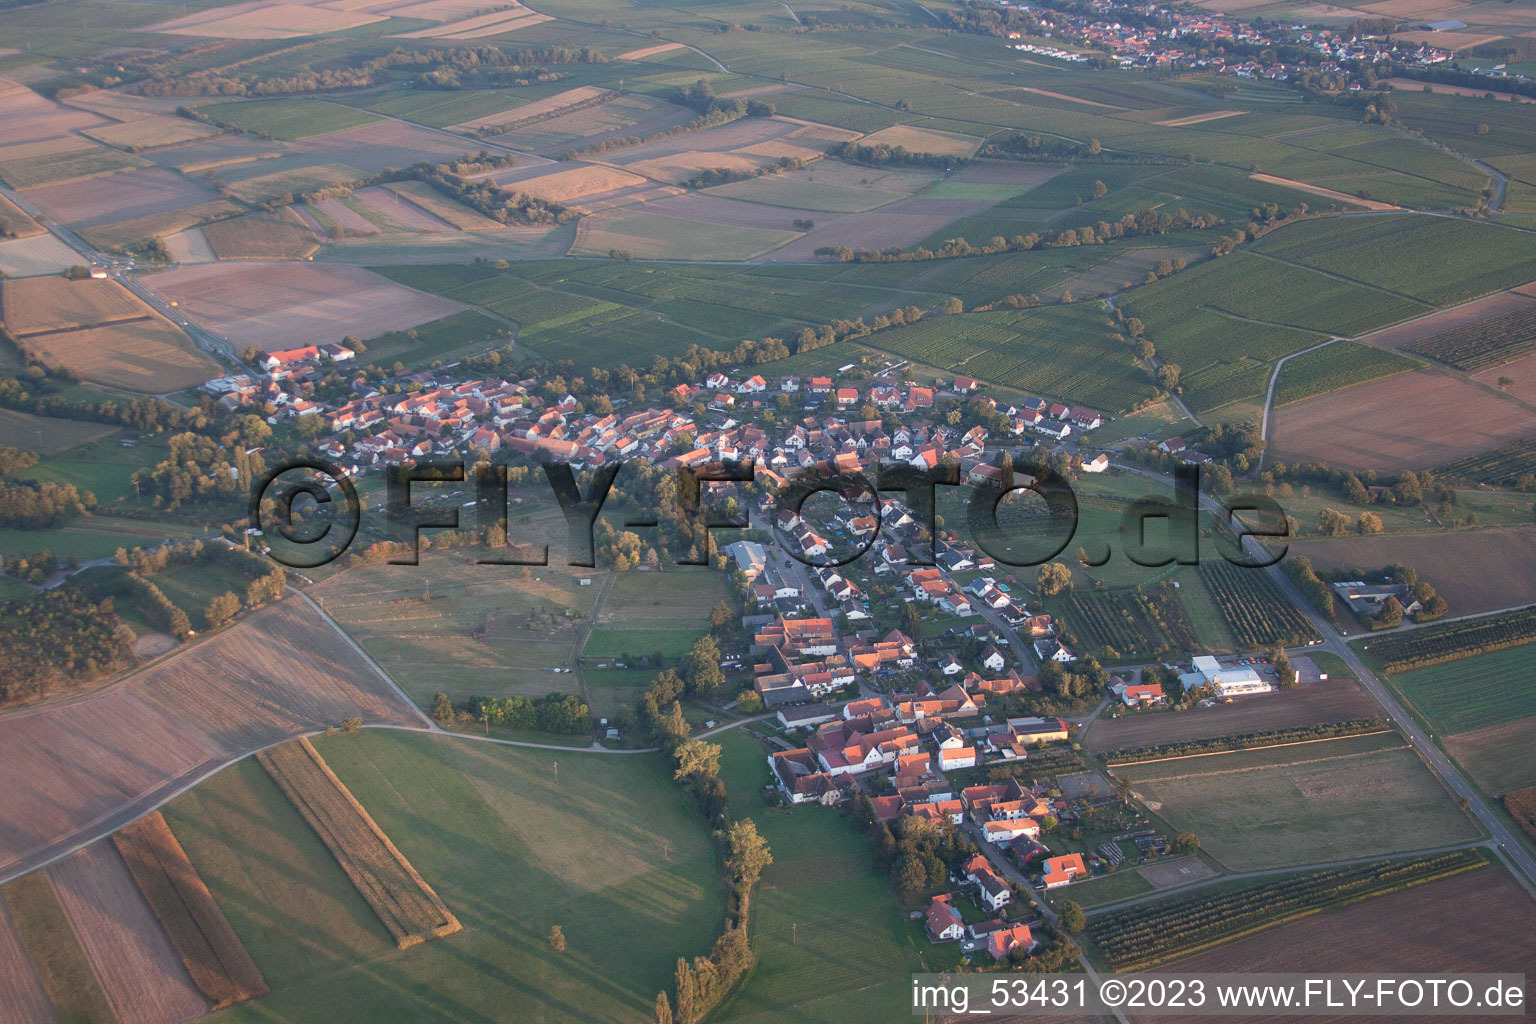 Oberhausen in the state Rhineland-Palatinate, Germany seen from above